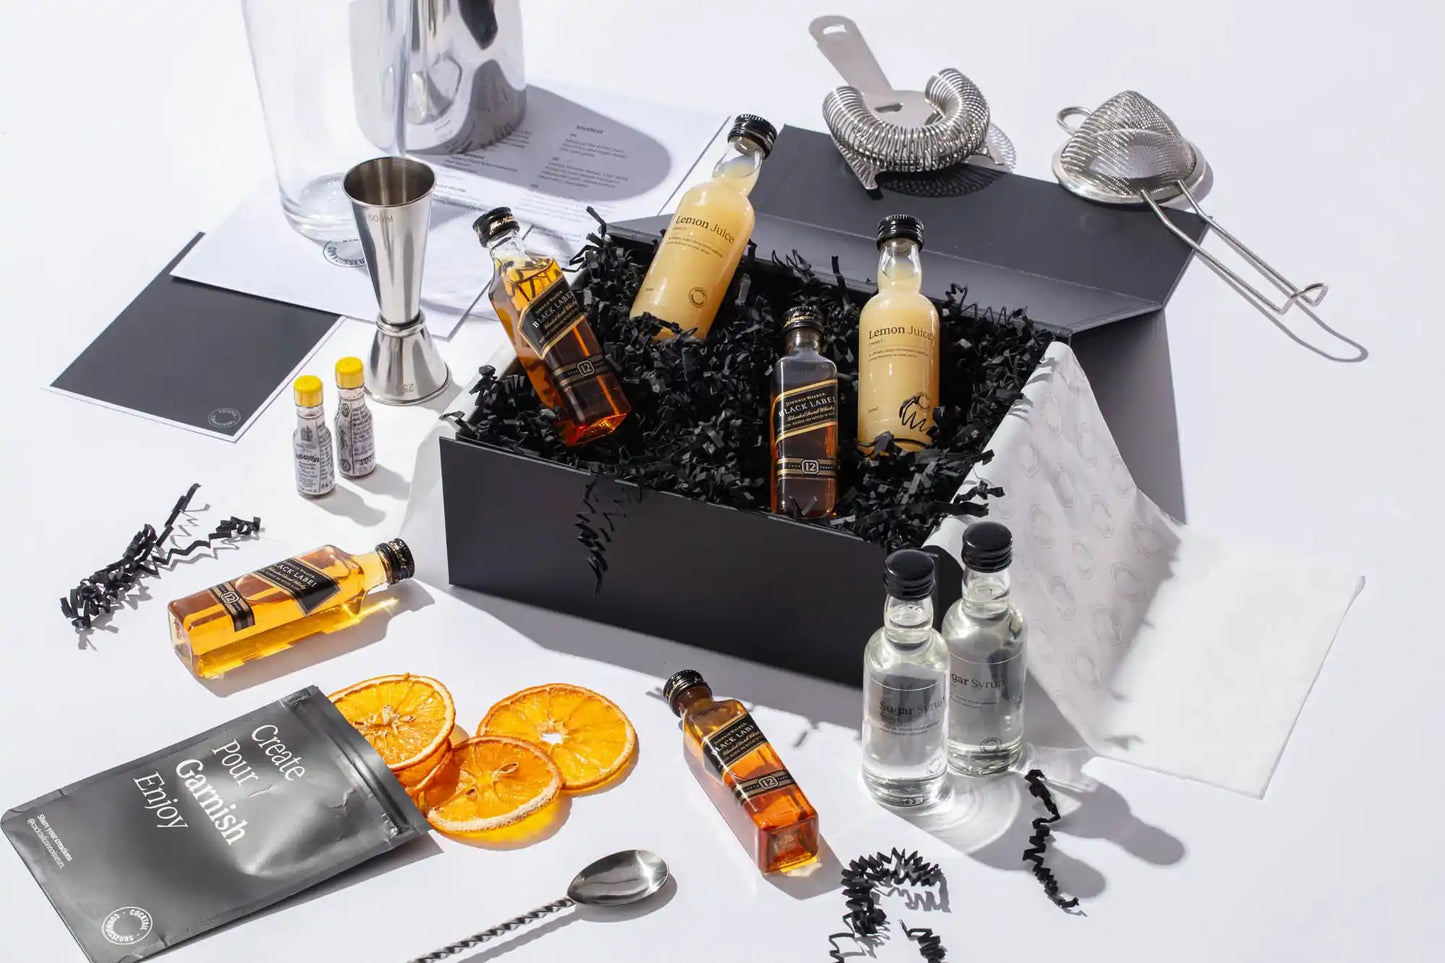 Whisky Sour cocktail kit gift set with advanced bar equipment